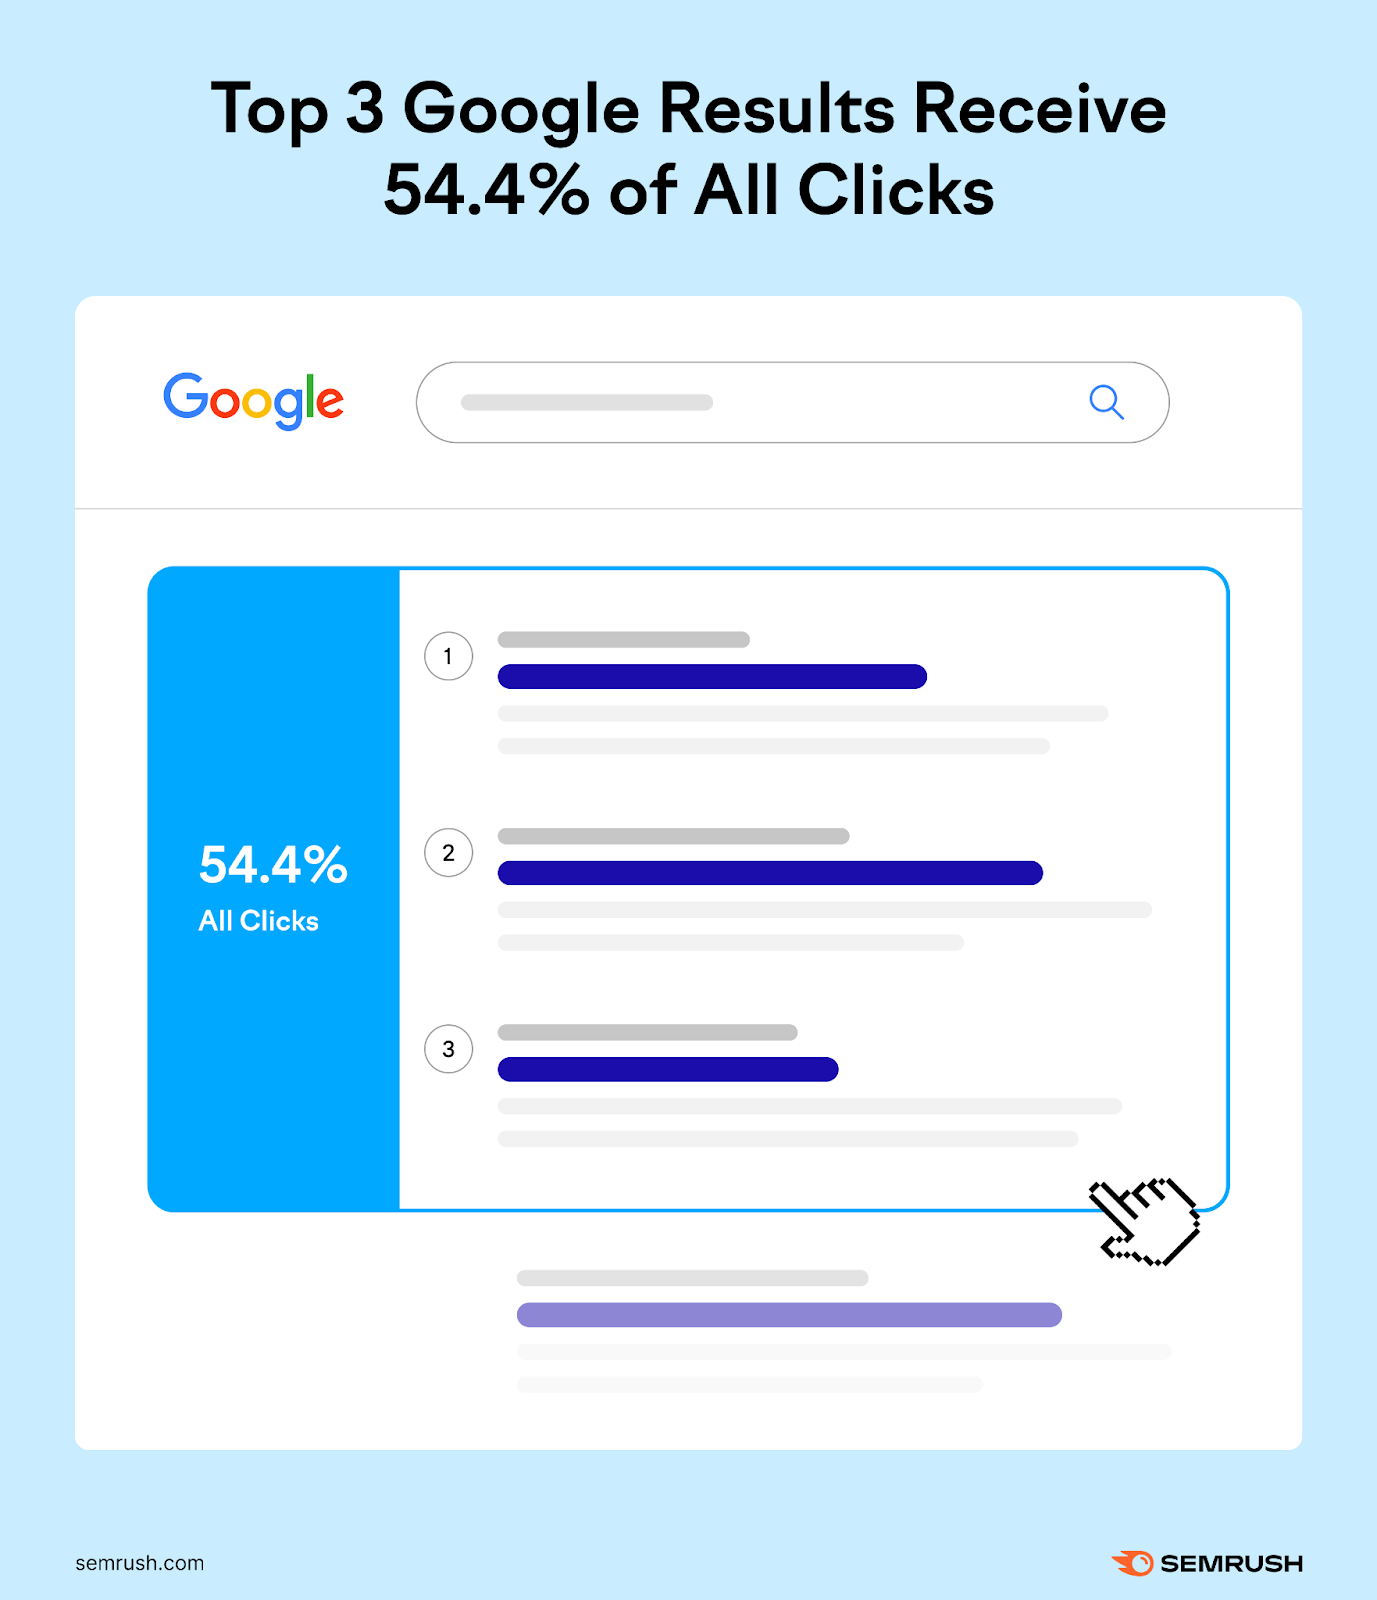 Backlinko study found that the top three google results receive 54.4% of all clicks.